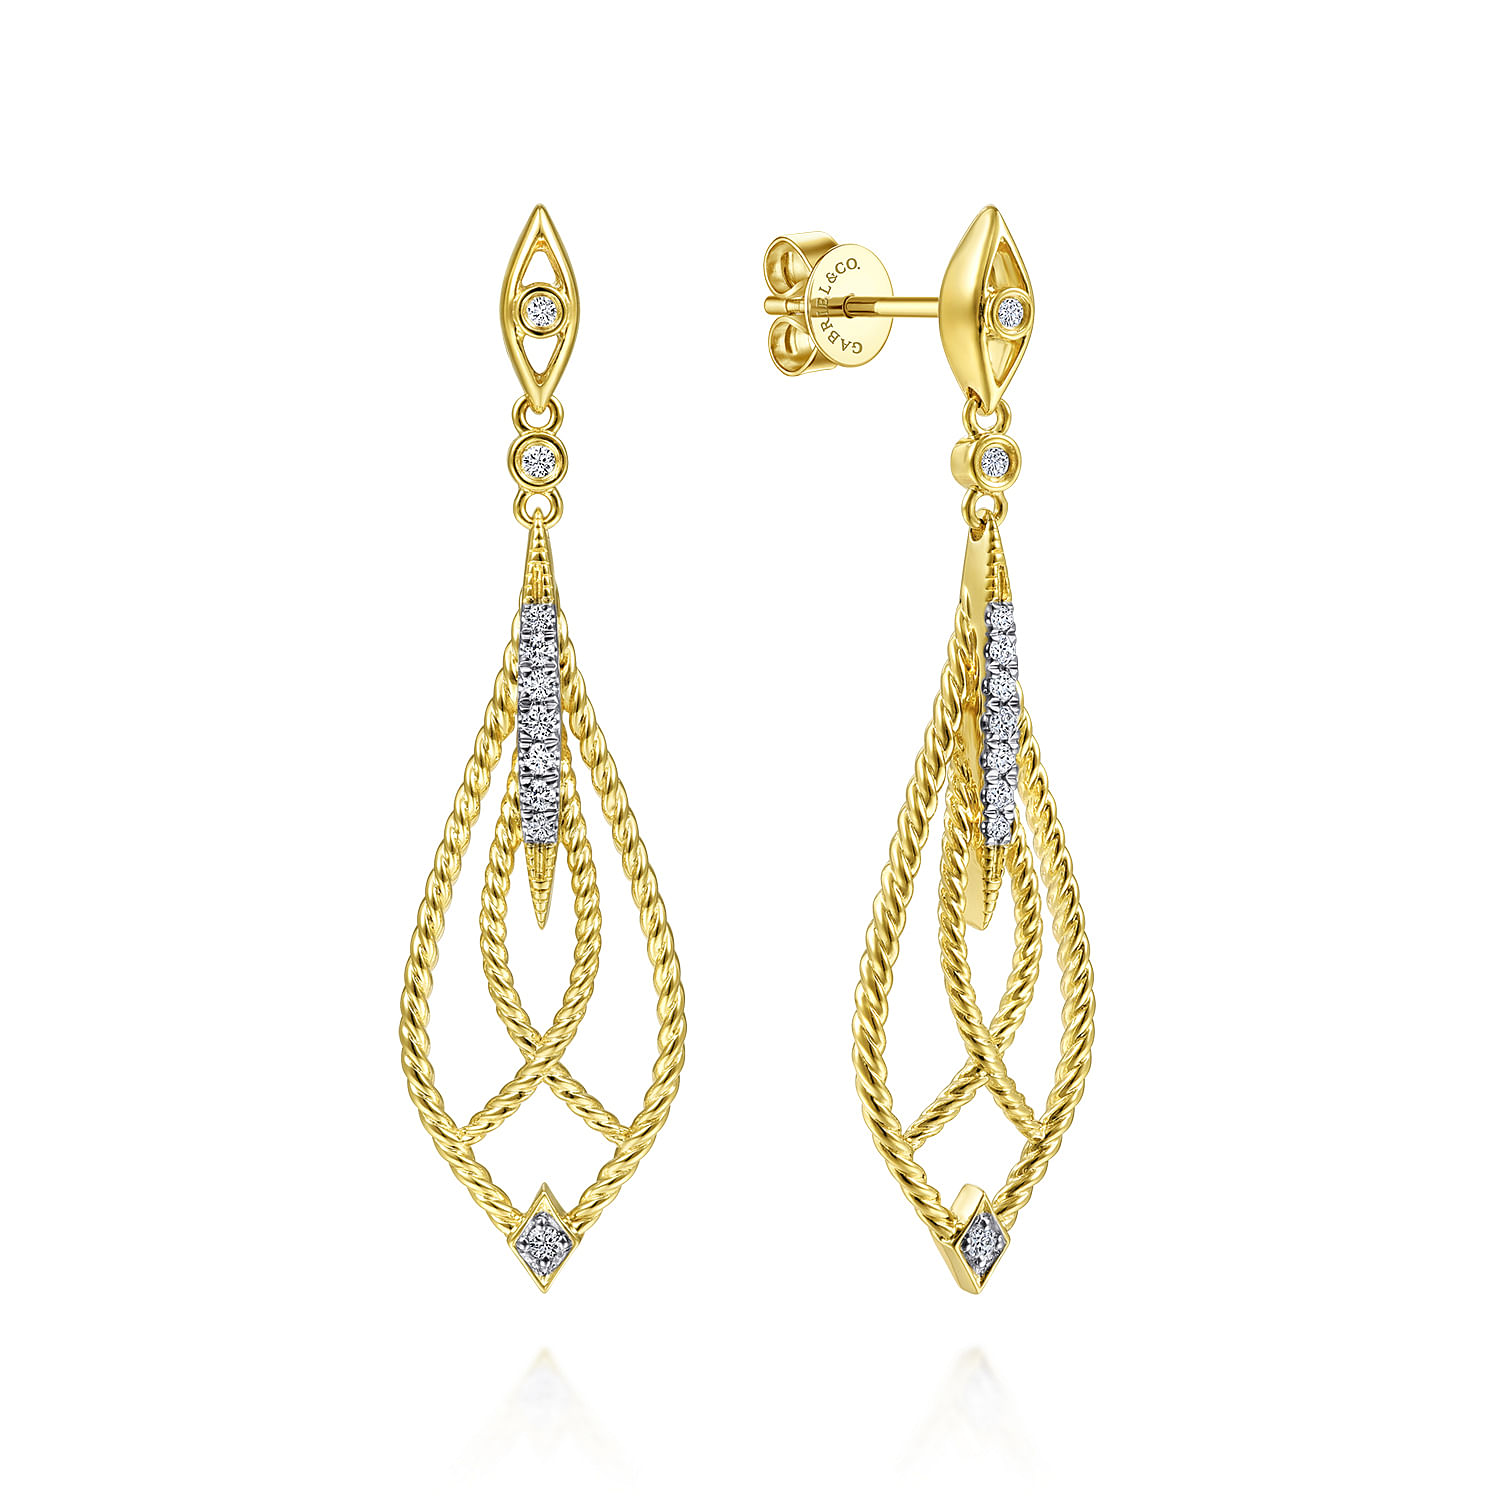 14K Yellow Gold Open Twisted Rope Drop Earrings with Diamond Accents